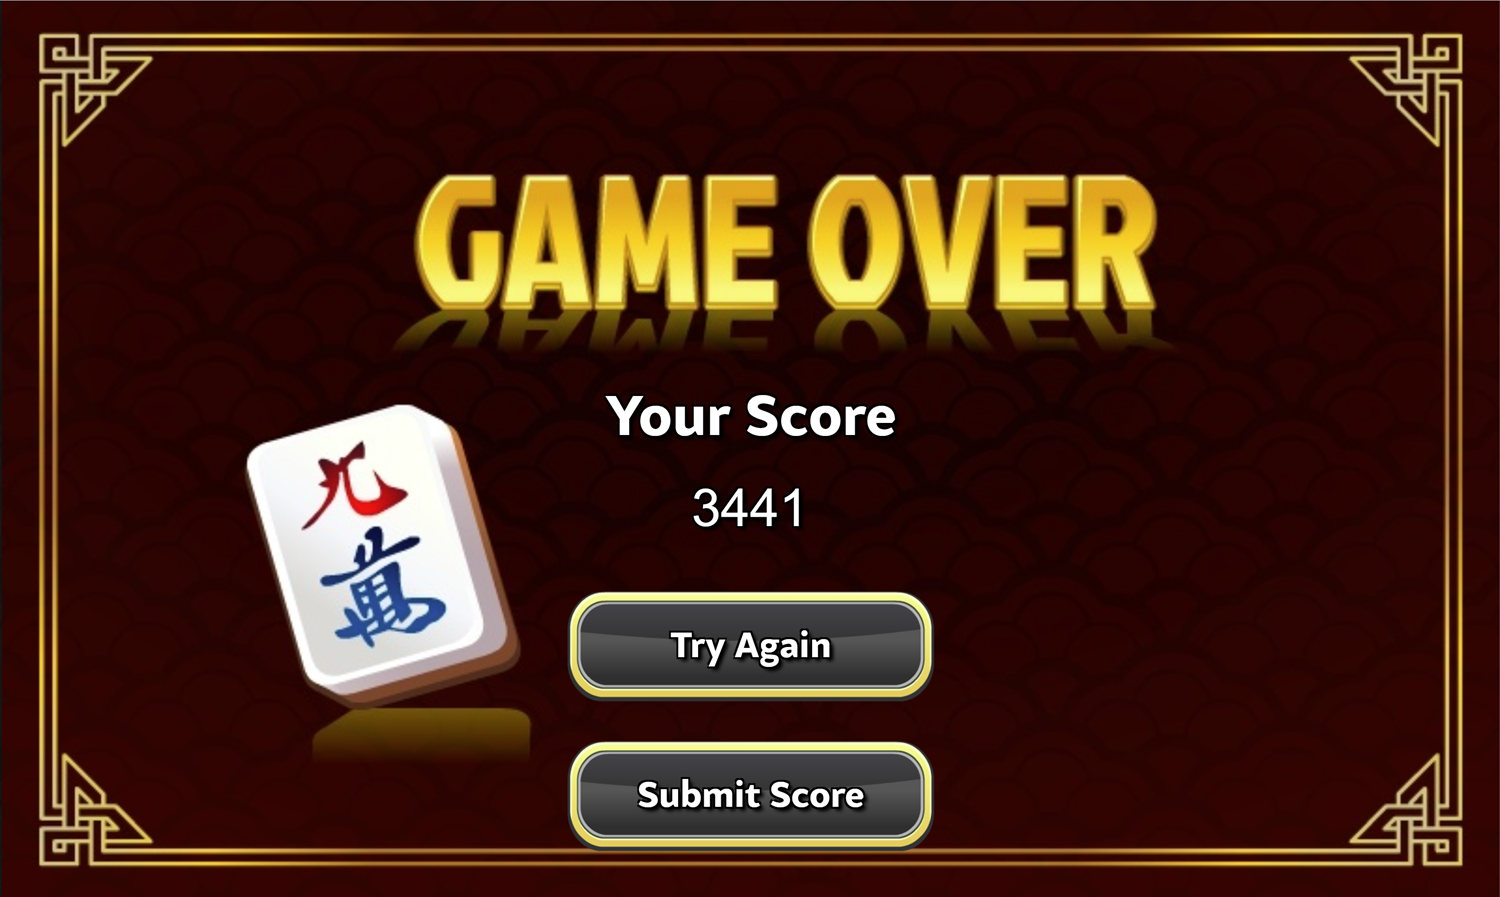 Triple Connect Game Over Screen Screenshot.